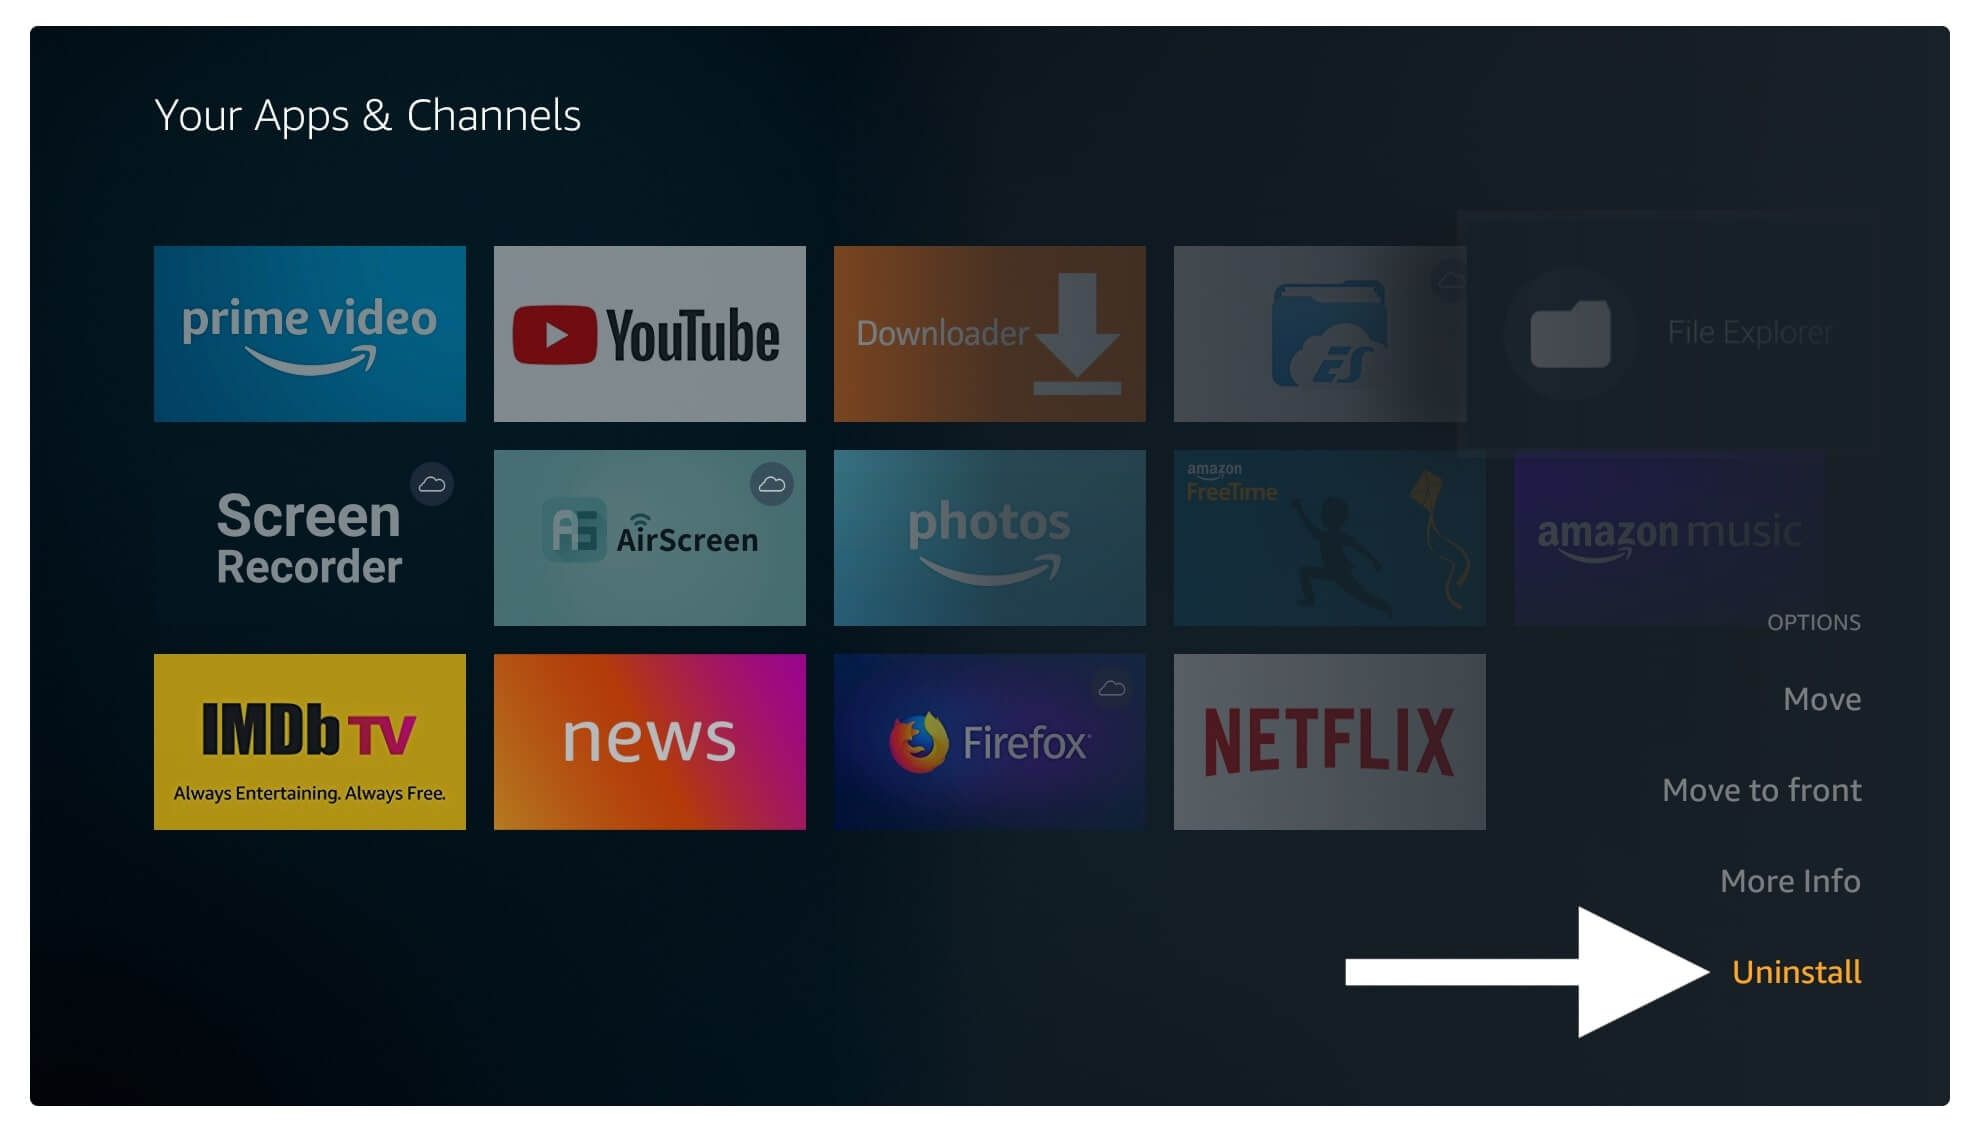 firestick-apps-delete-and-uninstall